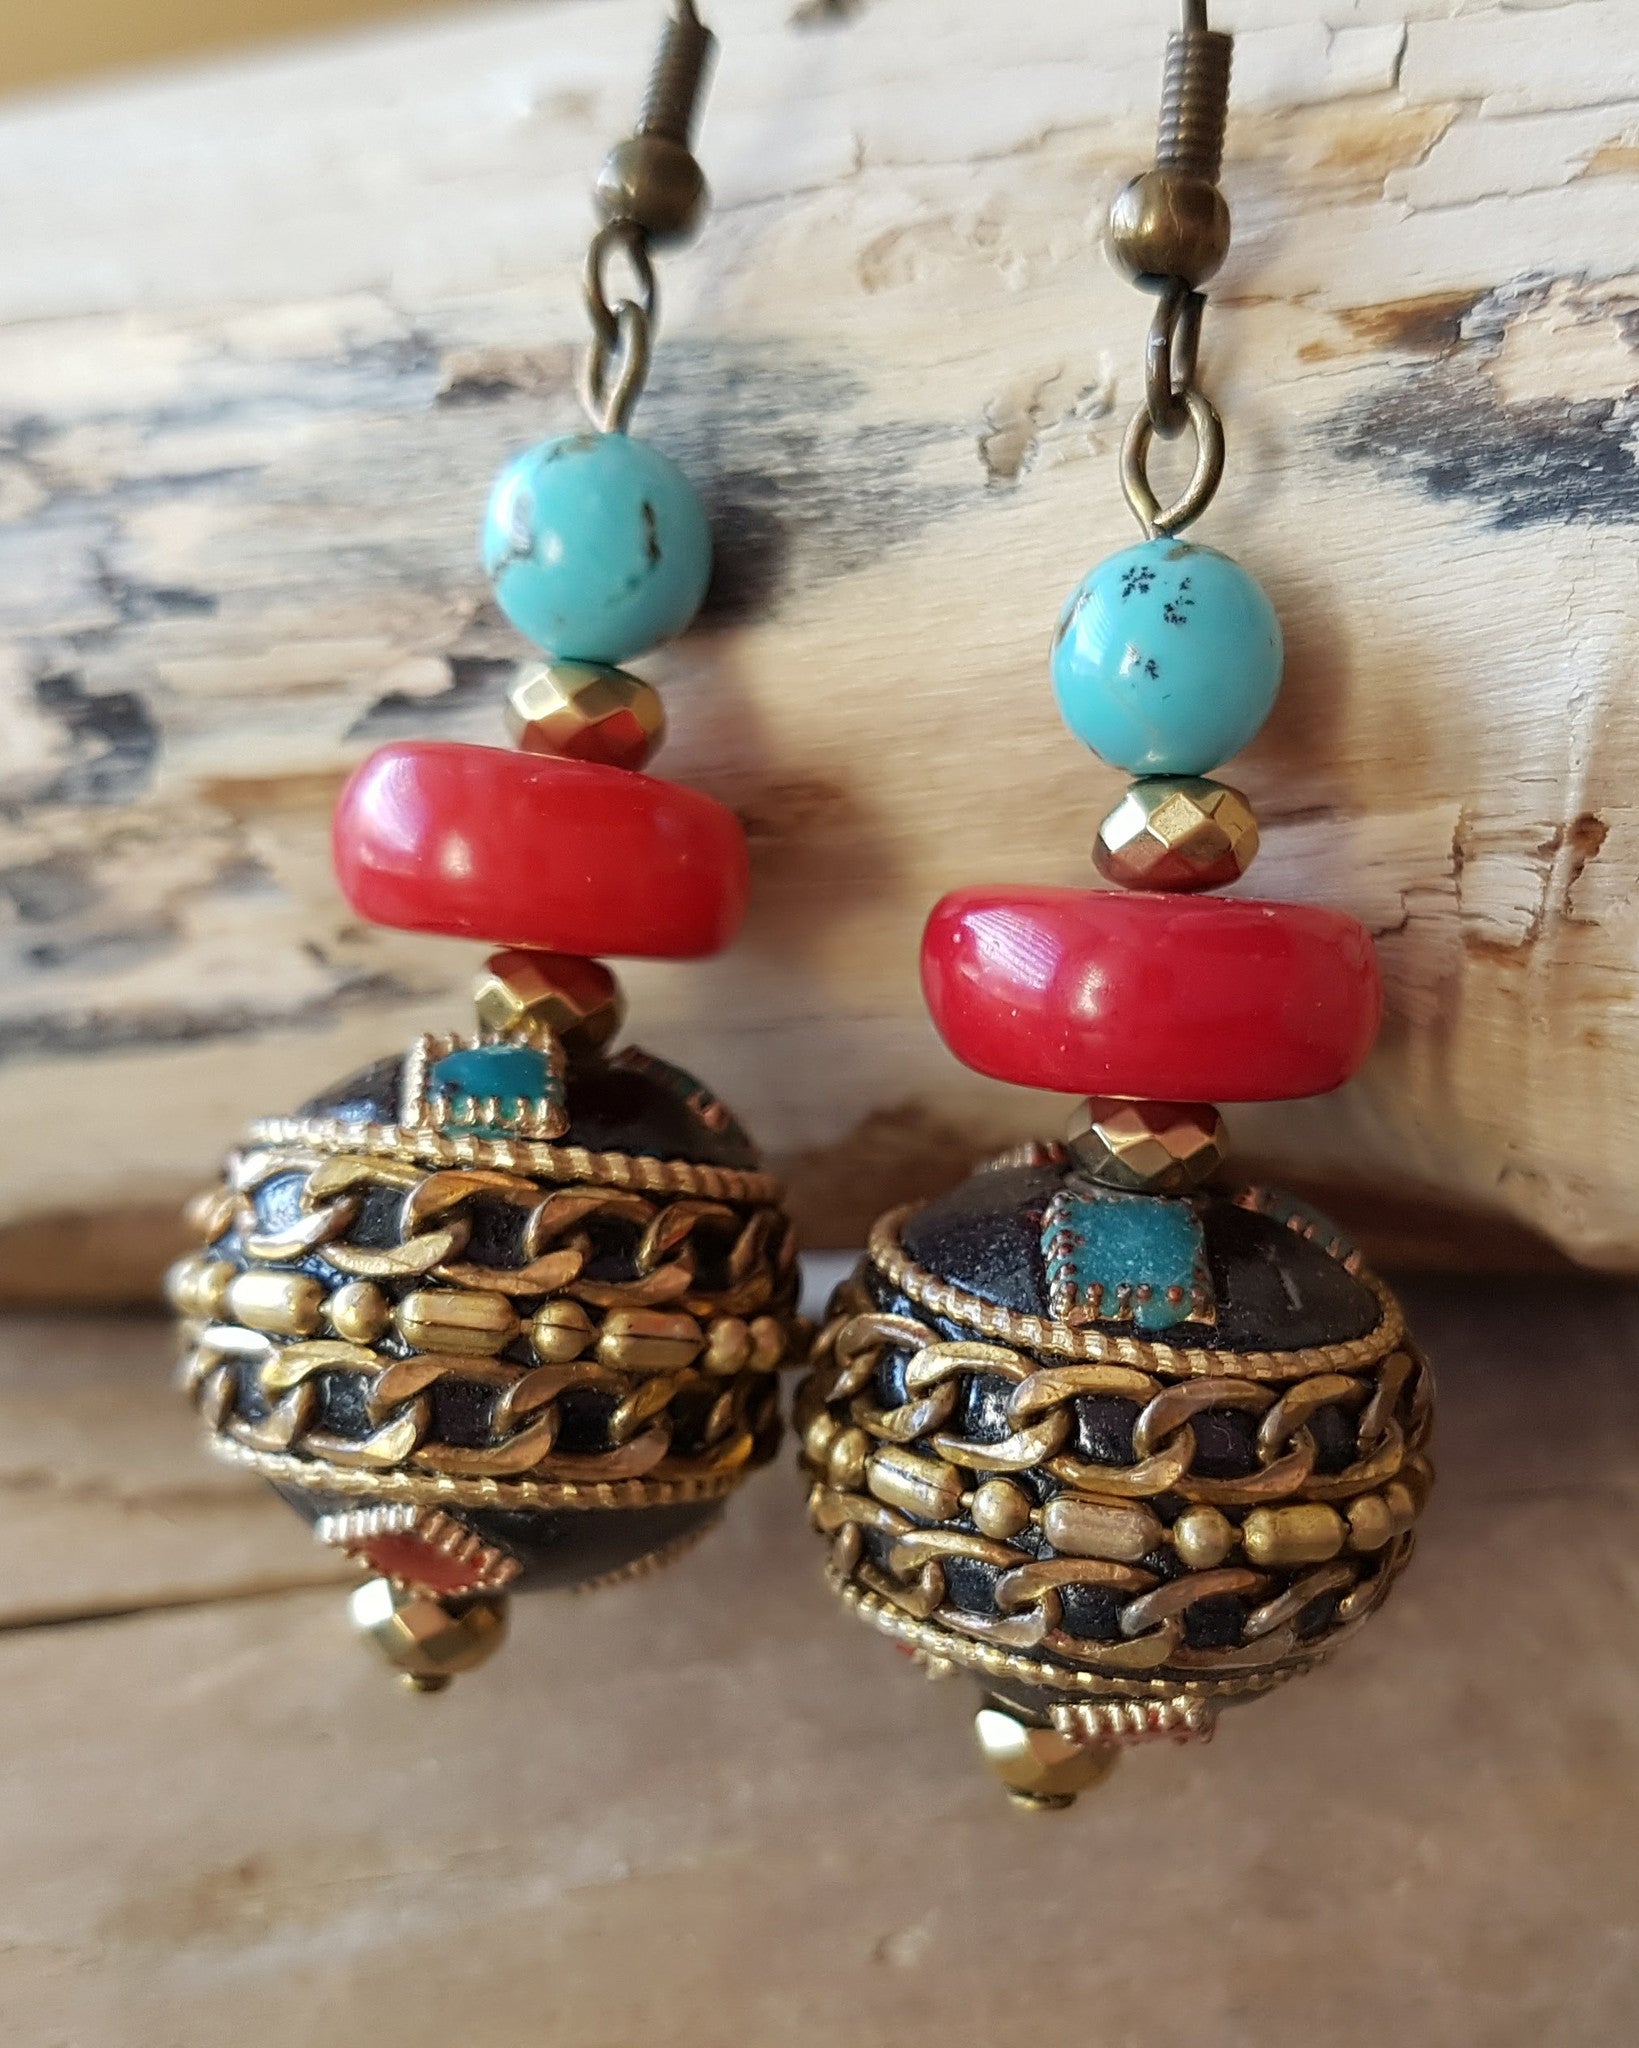 Tribal Dance Turquoise and Coral Earrings, Handmade-Tibet Nepalese Beads-Coral-Turquoise, Hematite-Bohemian Earrings-Fair Trade-Vegan Friendly-Multi Color